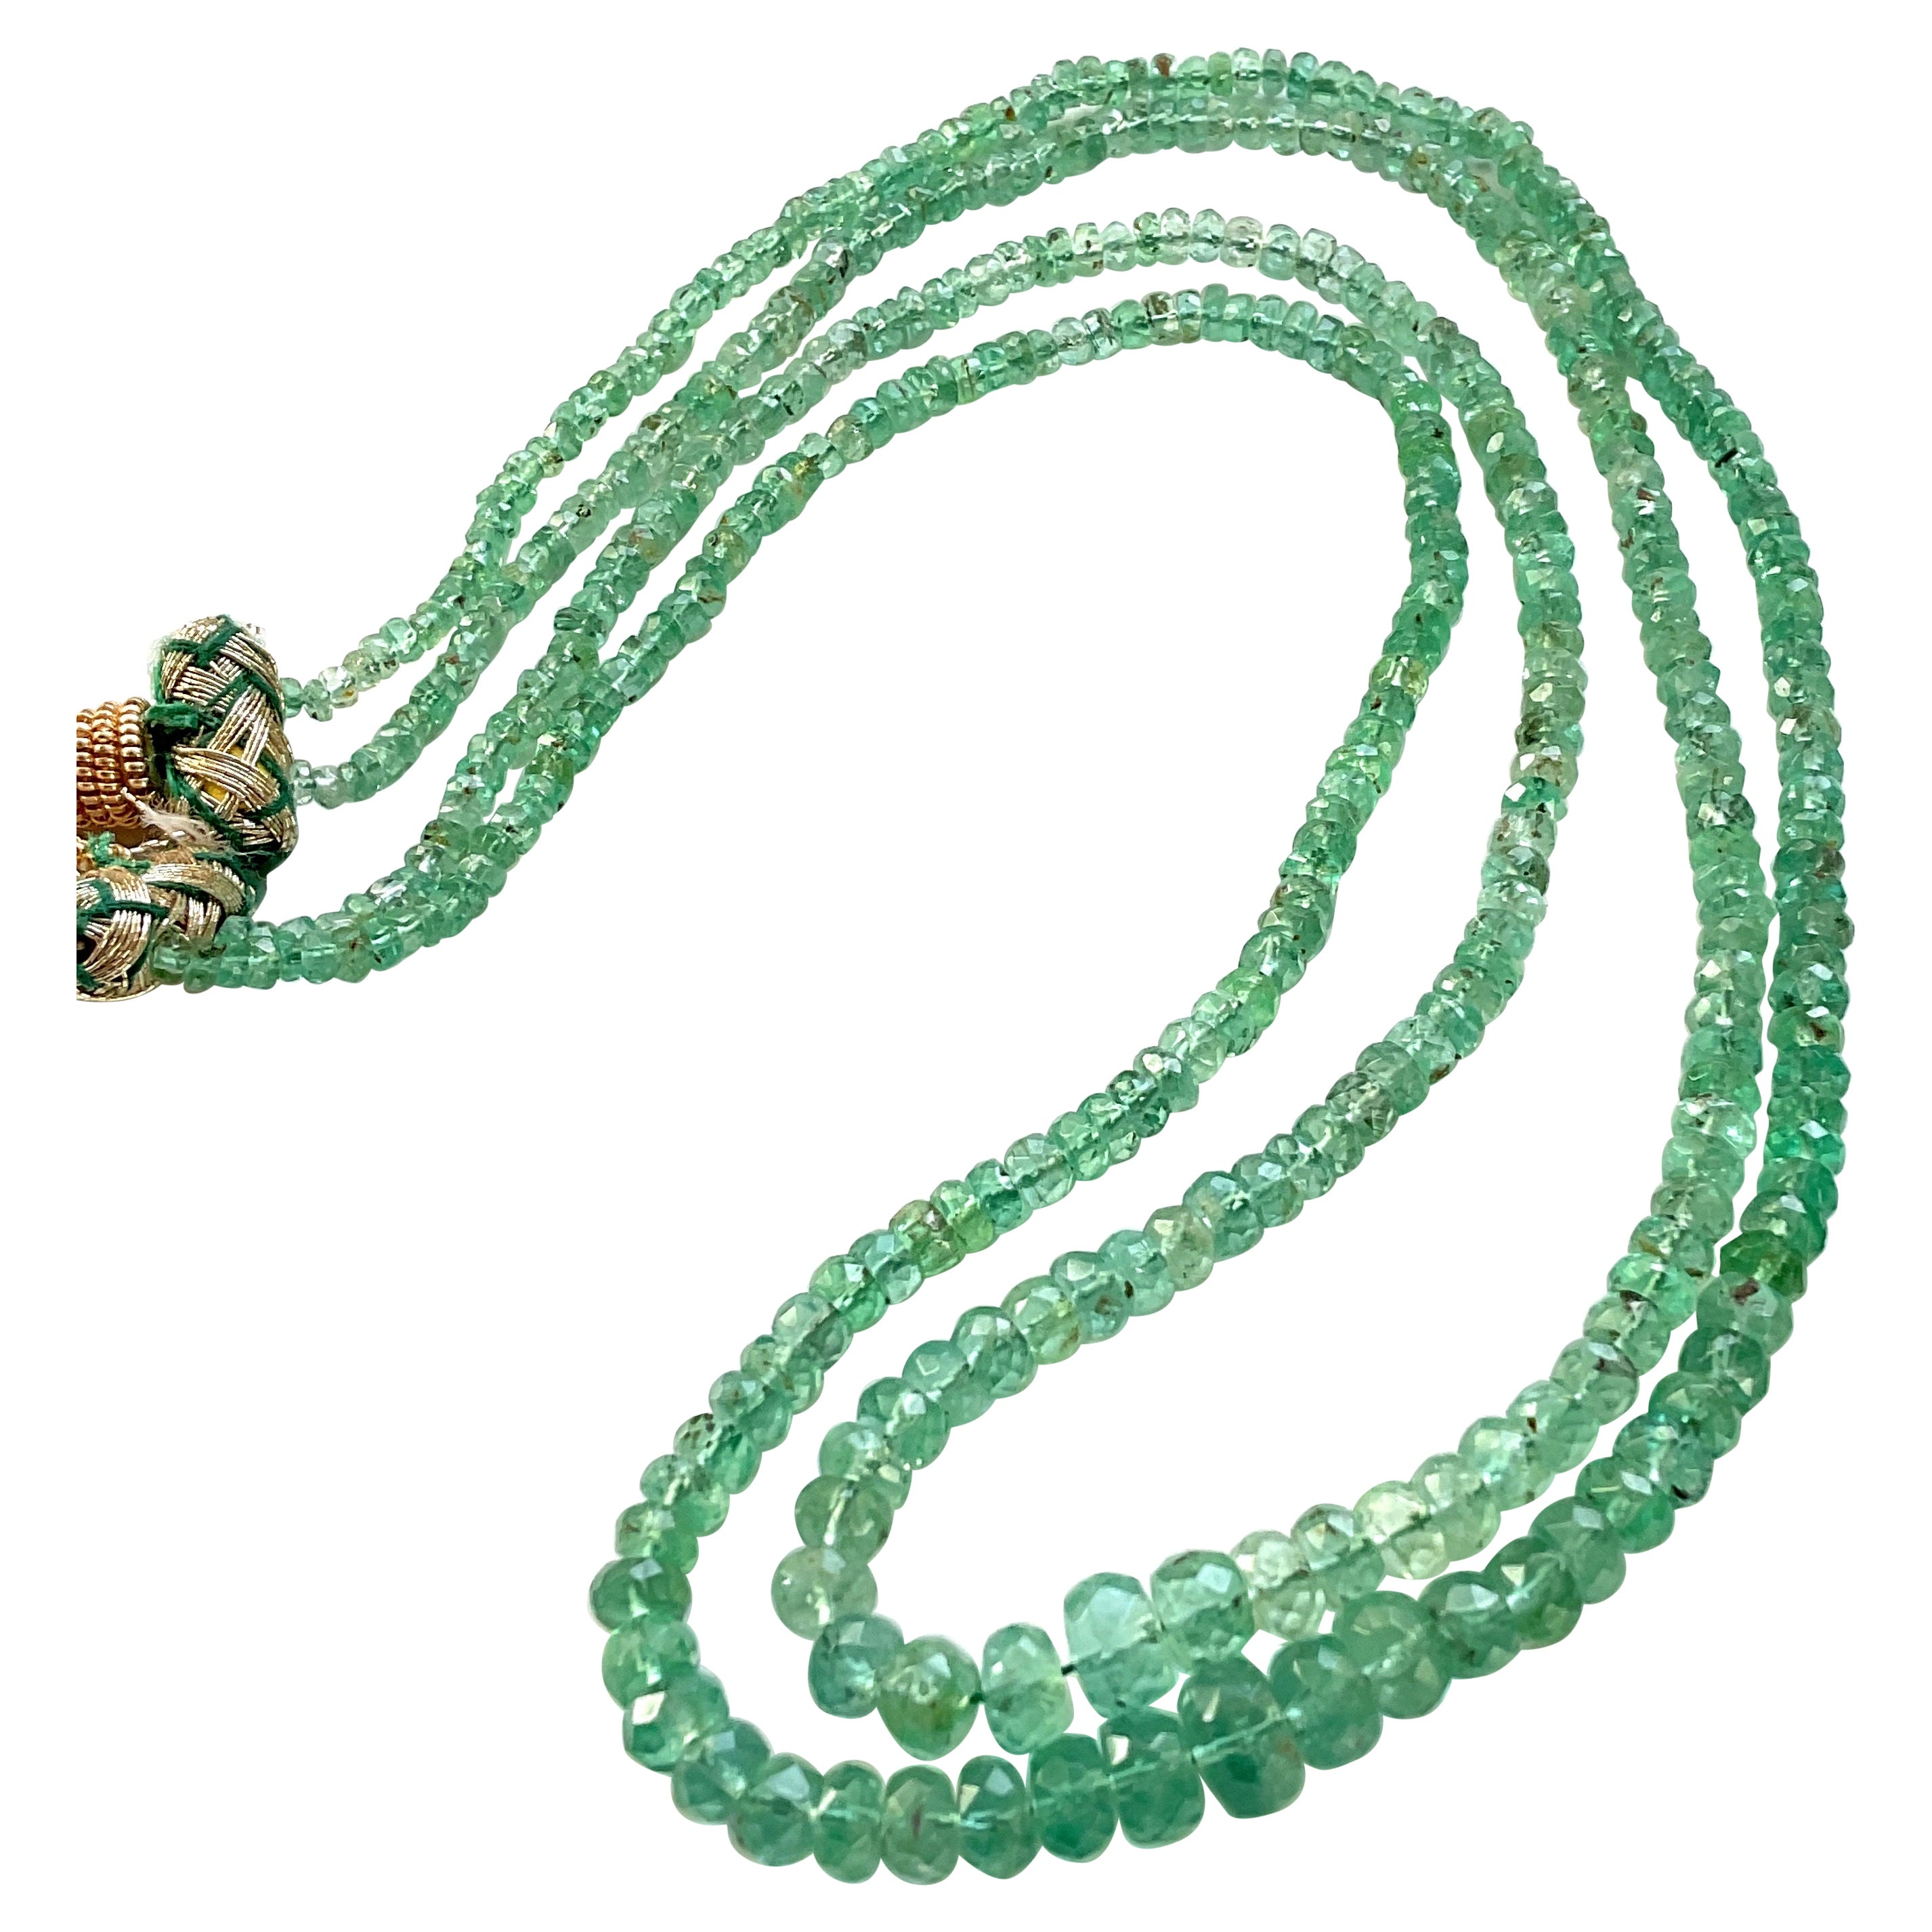 65.30 Carats Panjshir Emerald Faceted Beads For Fine Jewelry Natural Gemstone